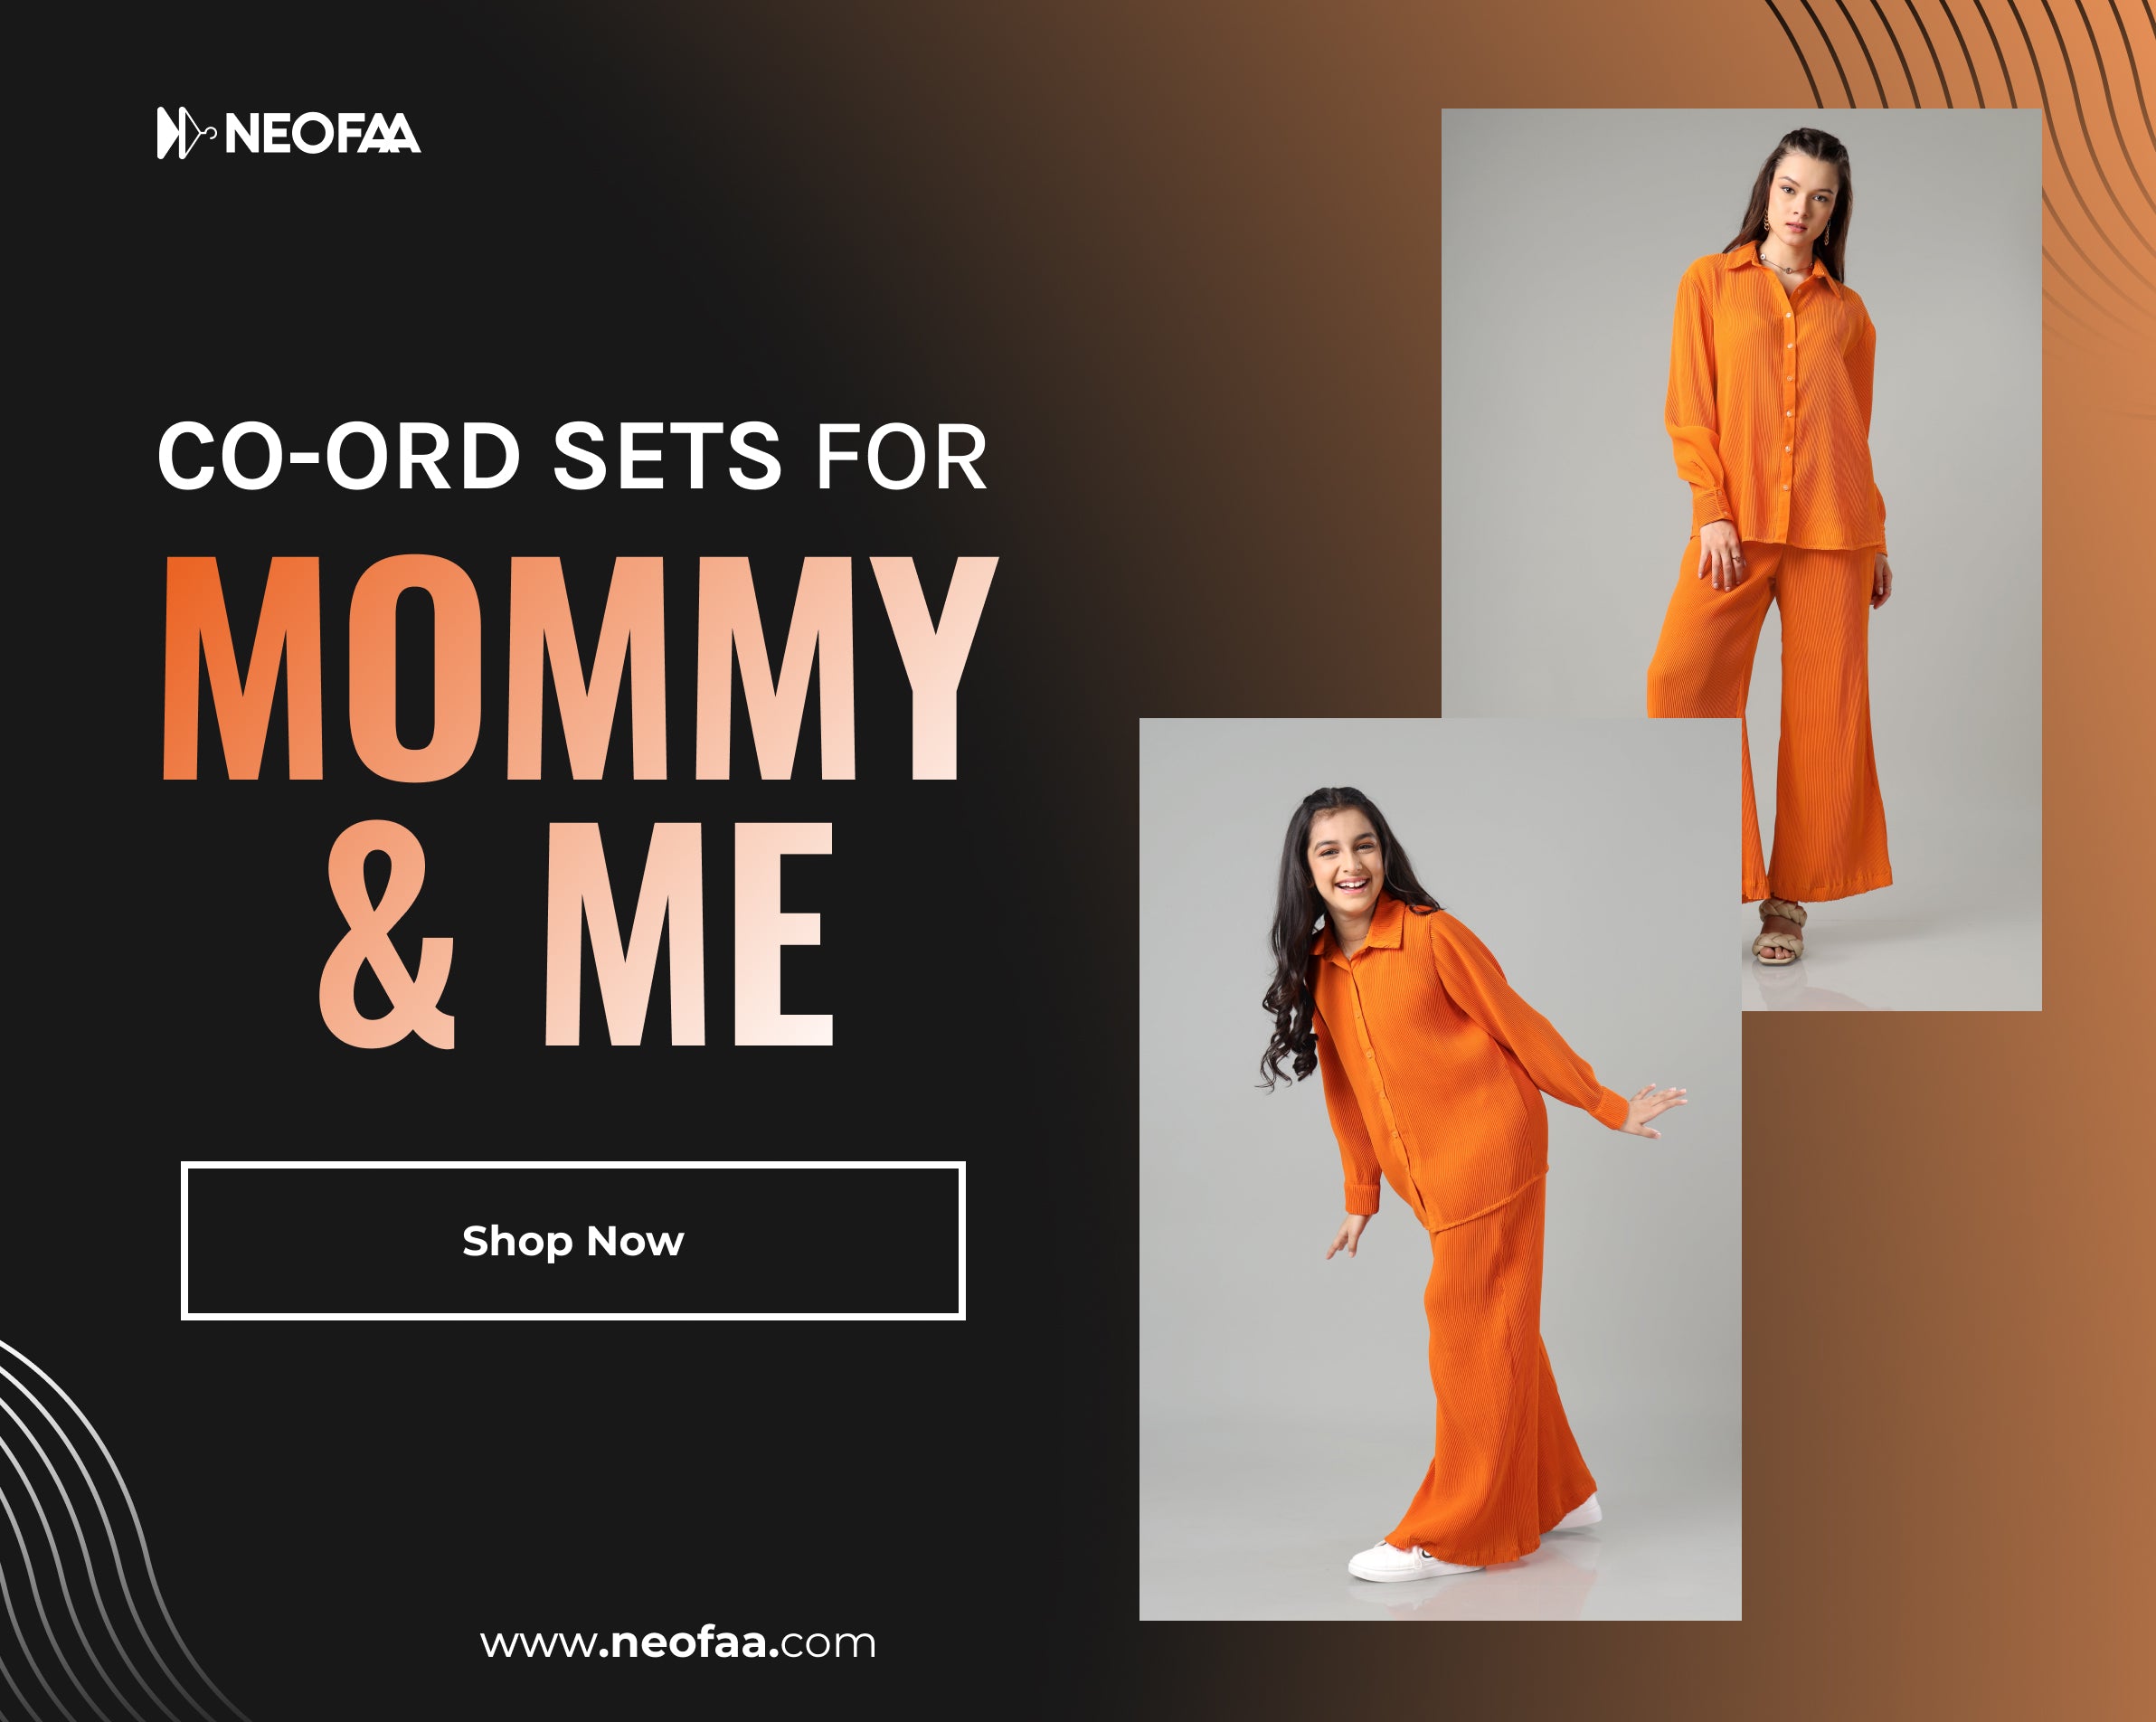 Co-ord Sets for Mommy & Me